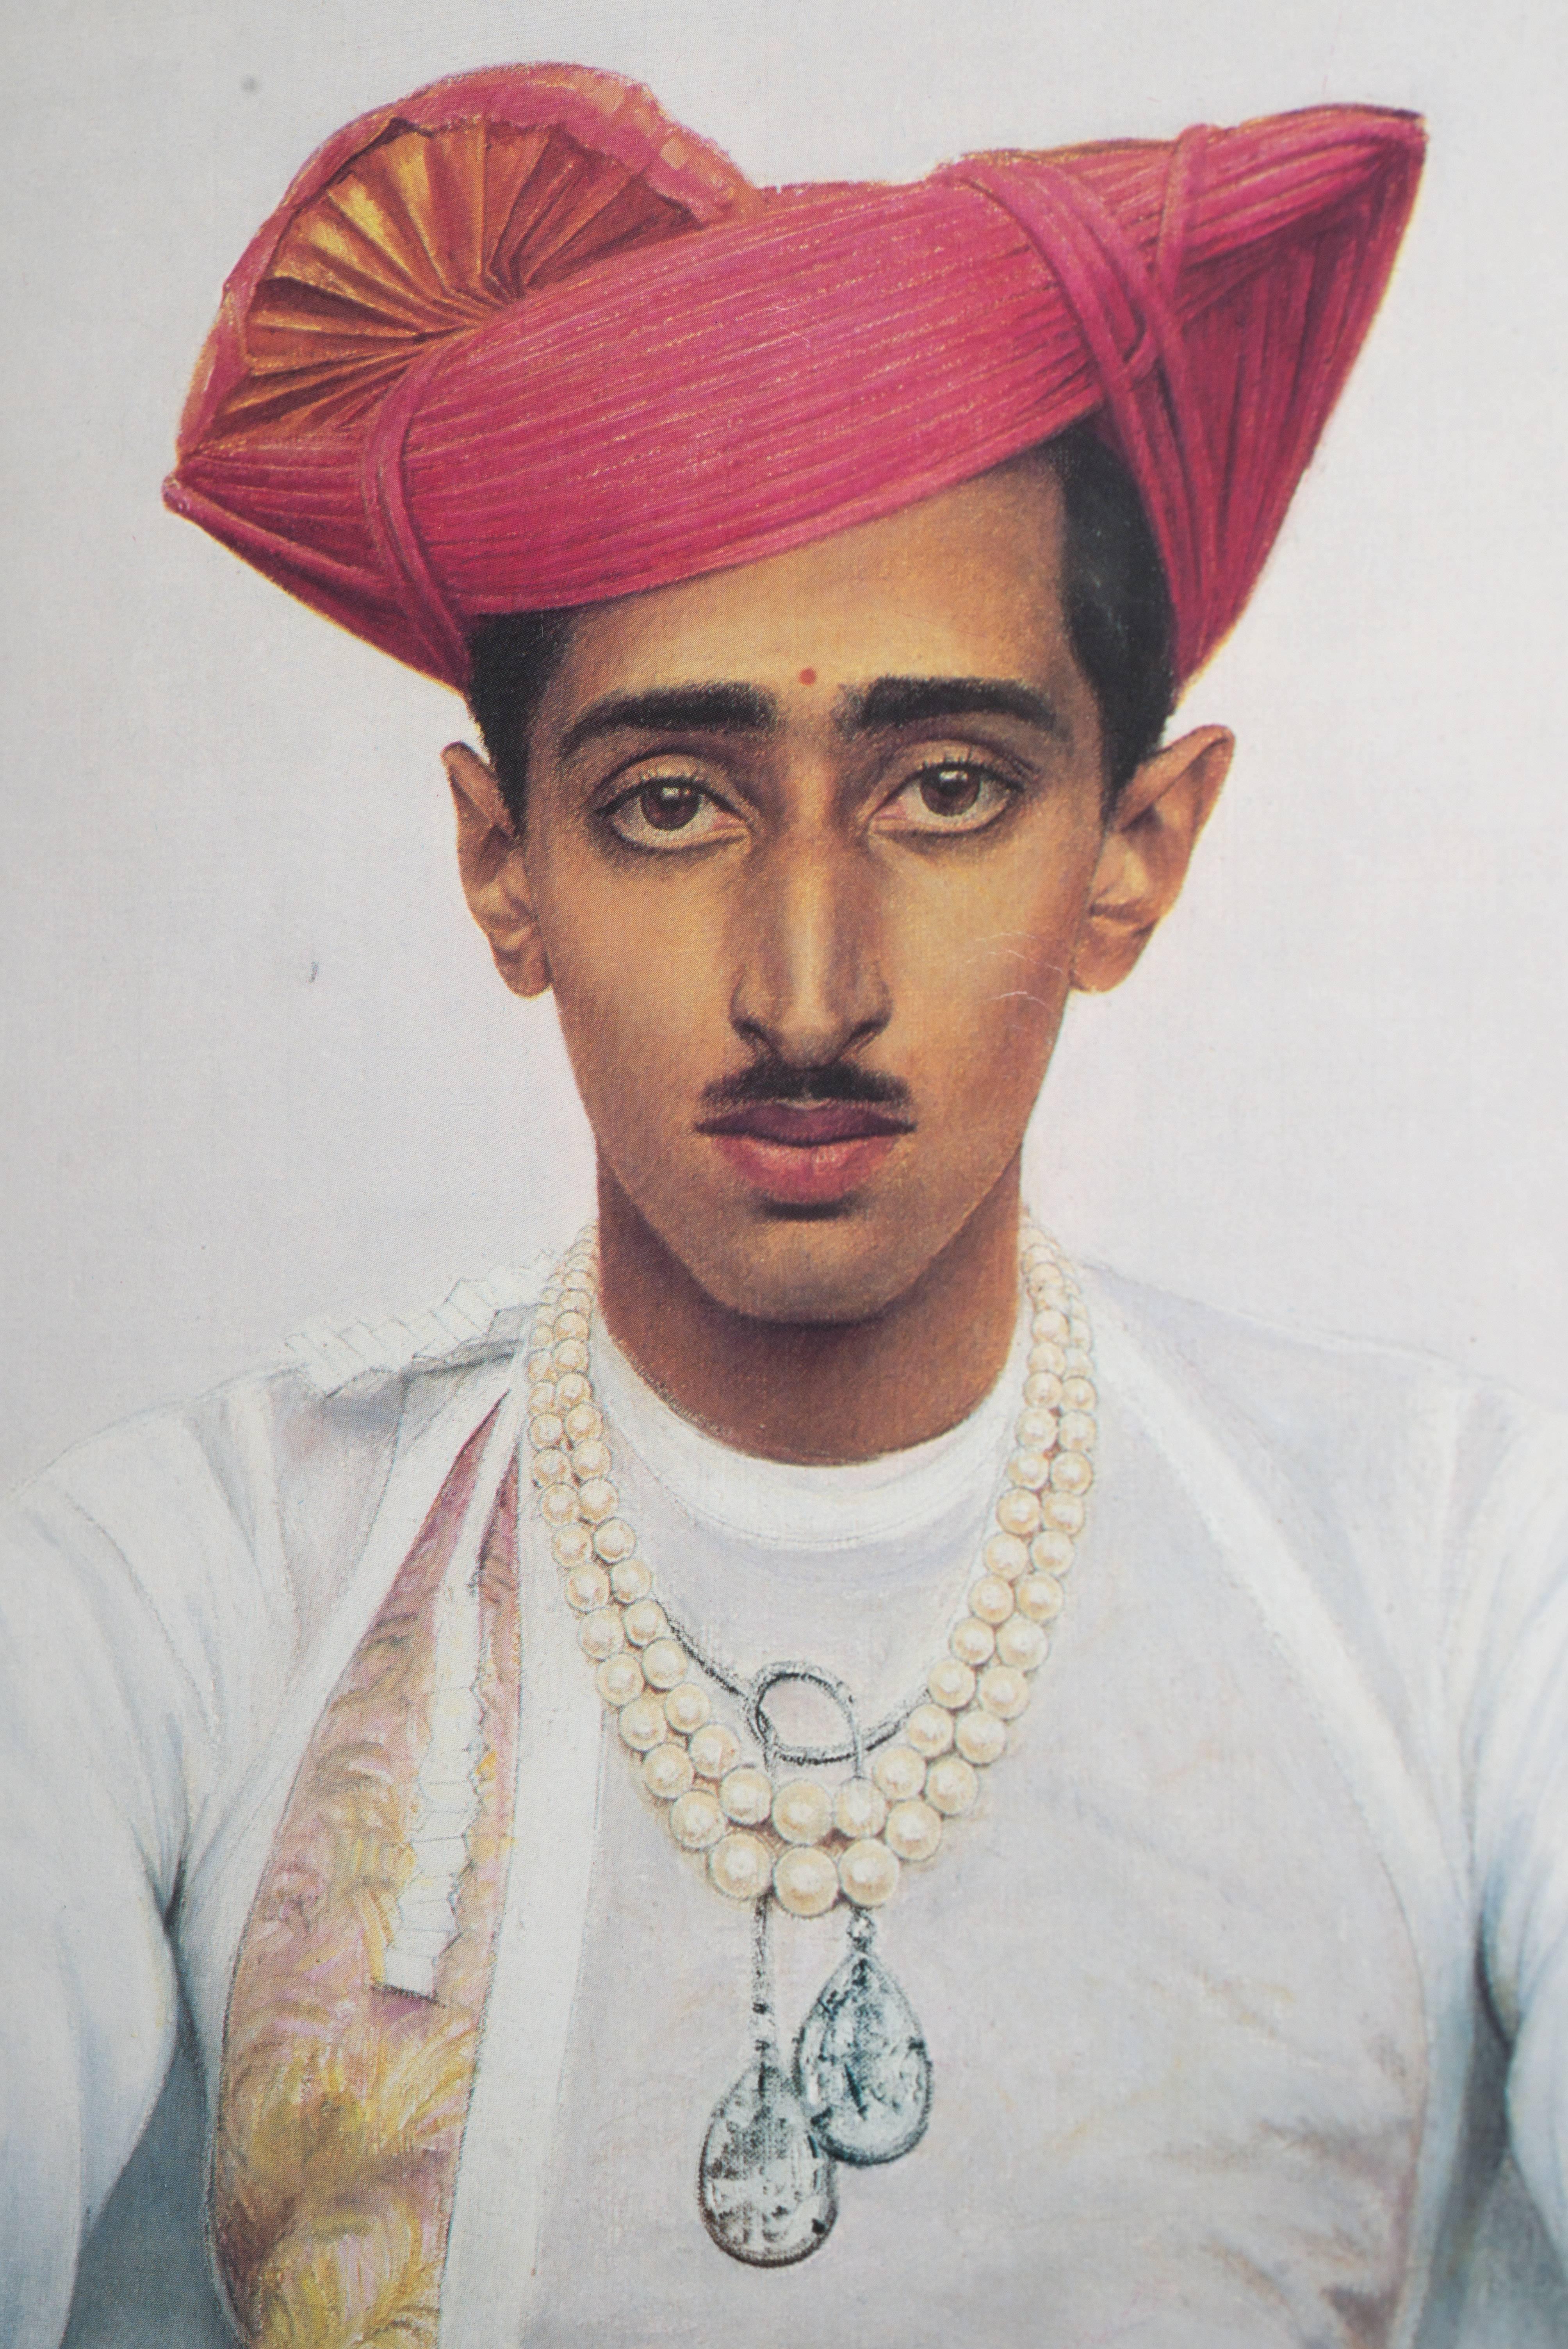 Metropolitan Museum Costume Institute poster costumes of Royal India Exhibition, 1985, Maharajah of Indore by Boutet de Monvel painted, 1934.
The poster shows His Highness Yeshwant Rao Holkar Bahadur Maharaja of Indore wearing Maratha dress and the